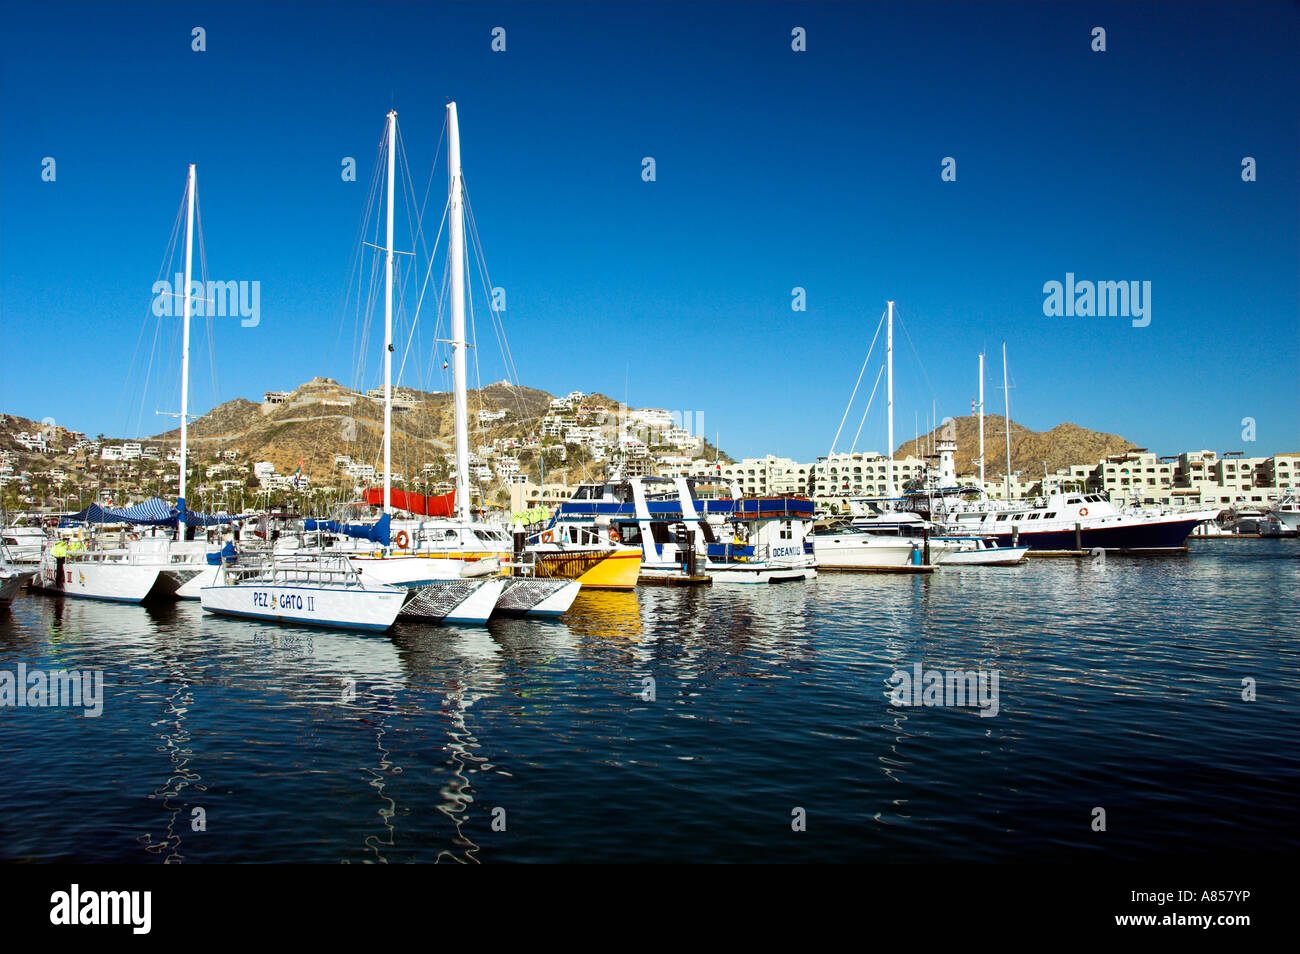 The marina with pleasure boats at the resort of Cabo San Lucas Mexico Stock Photo